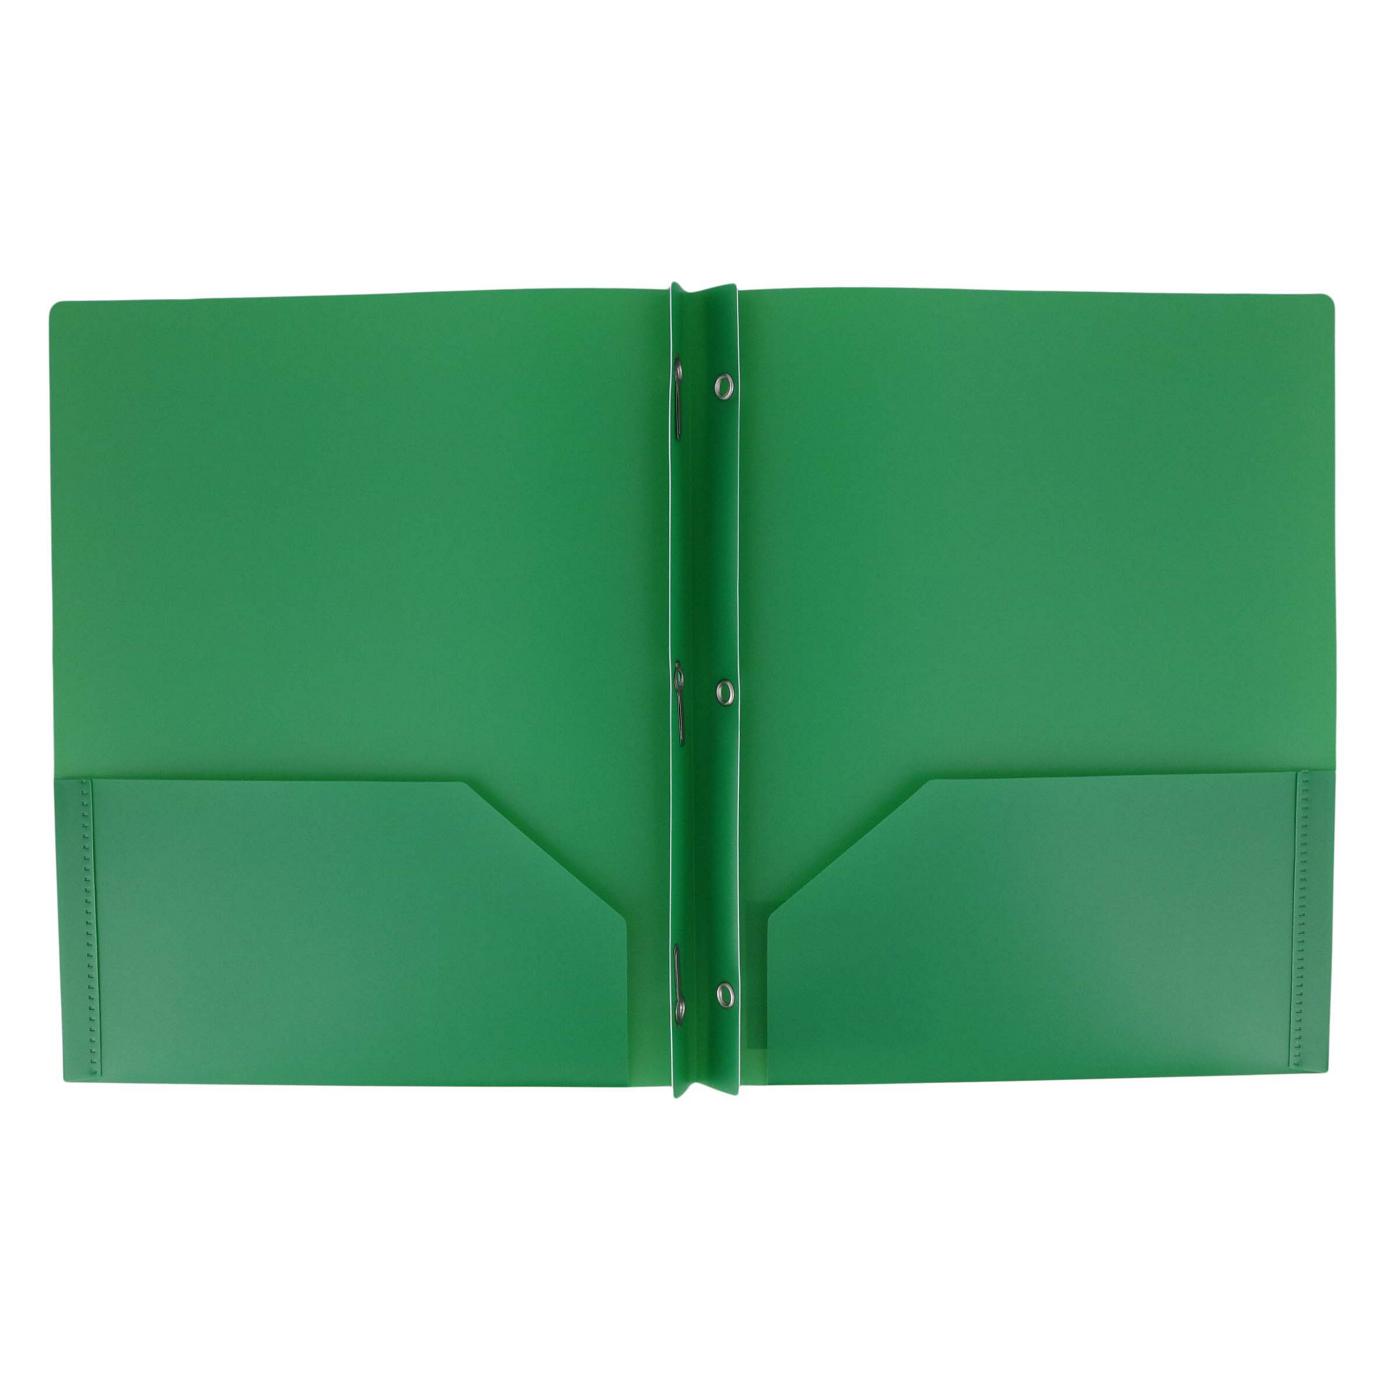 H-E-B Pocket Poly Folder with Prongs - Green; image 2 of 2